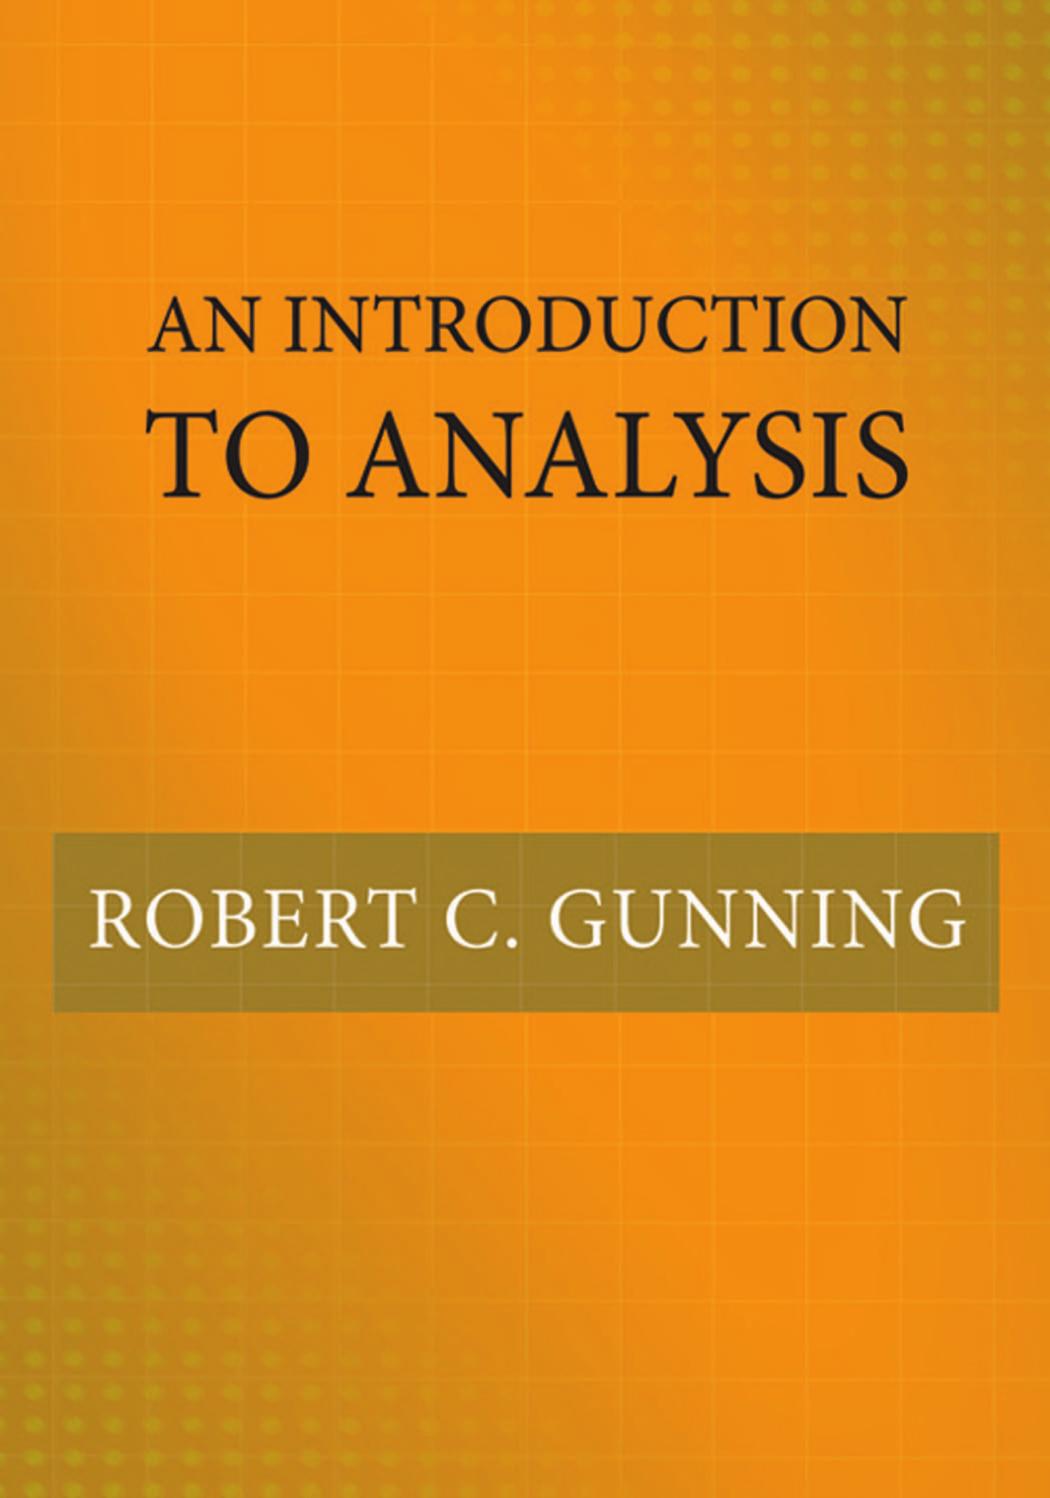 An Introduction to Analysis by Robert C. Gunning